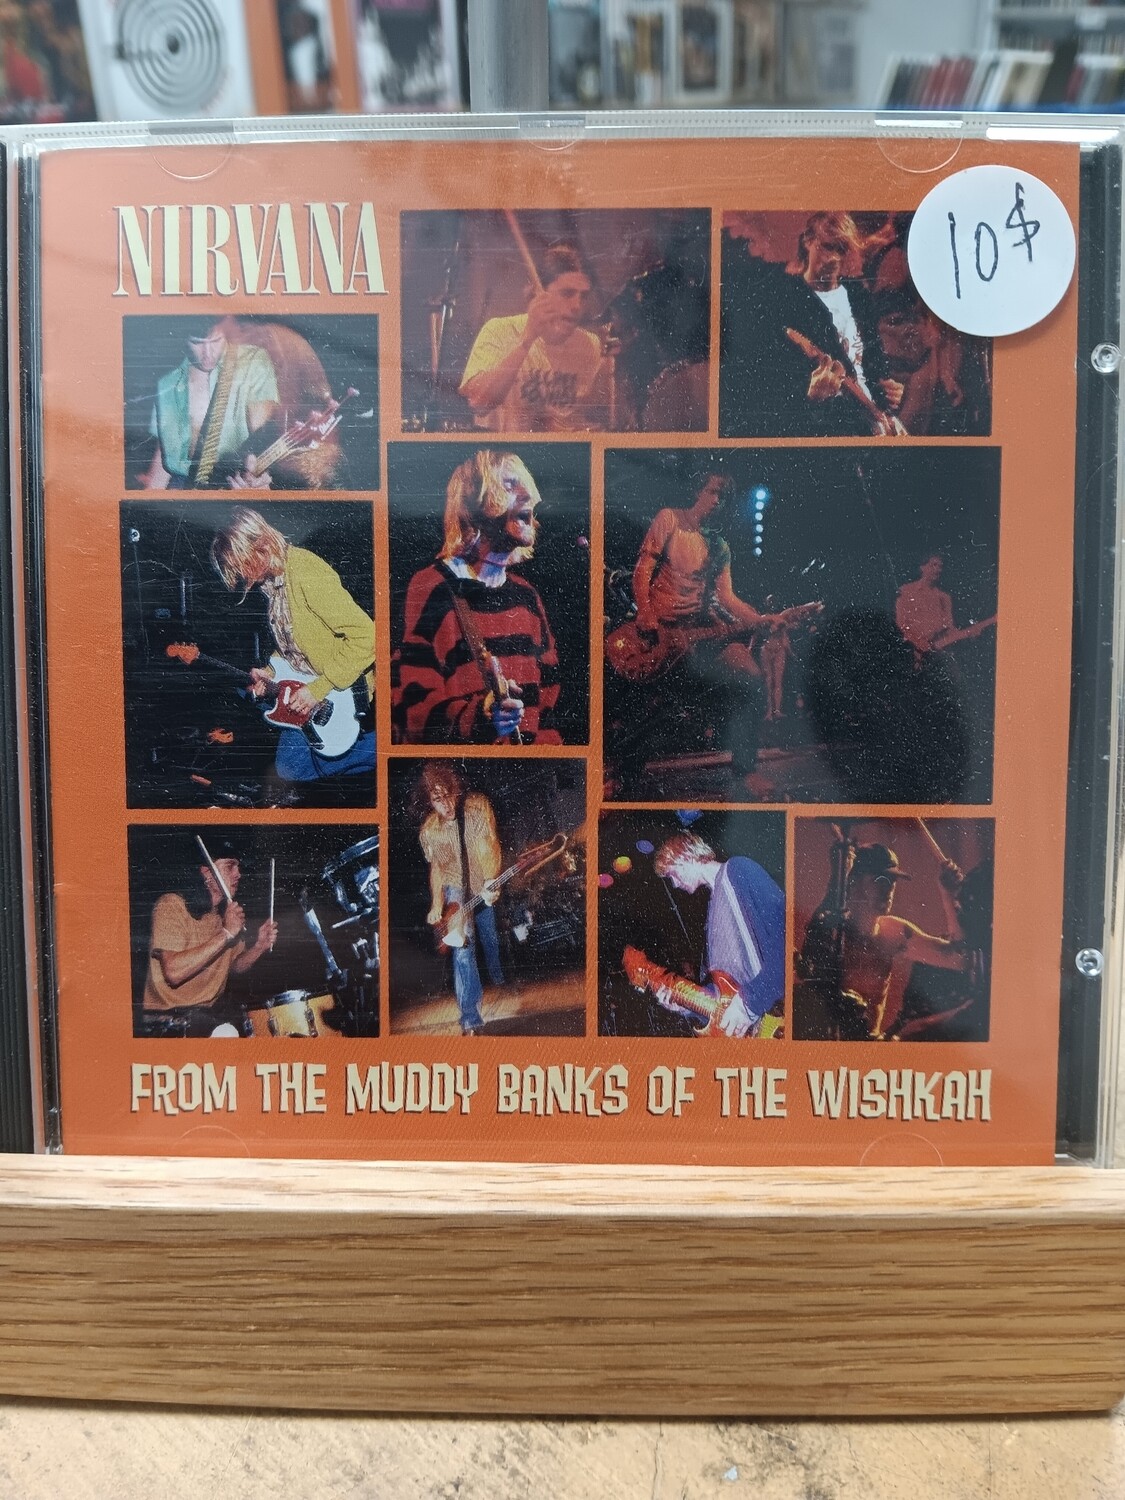 NIRVANA - From the Muddy Banks of the Wishkah (CD)